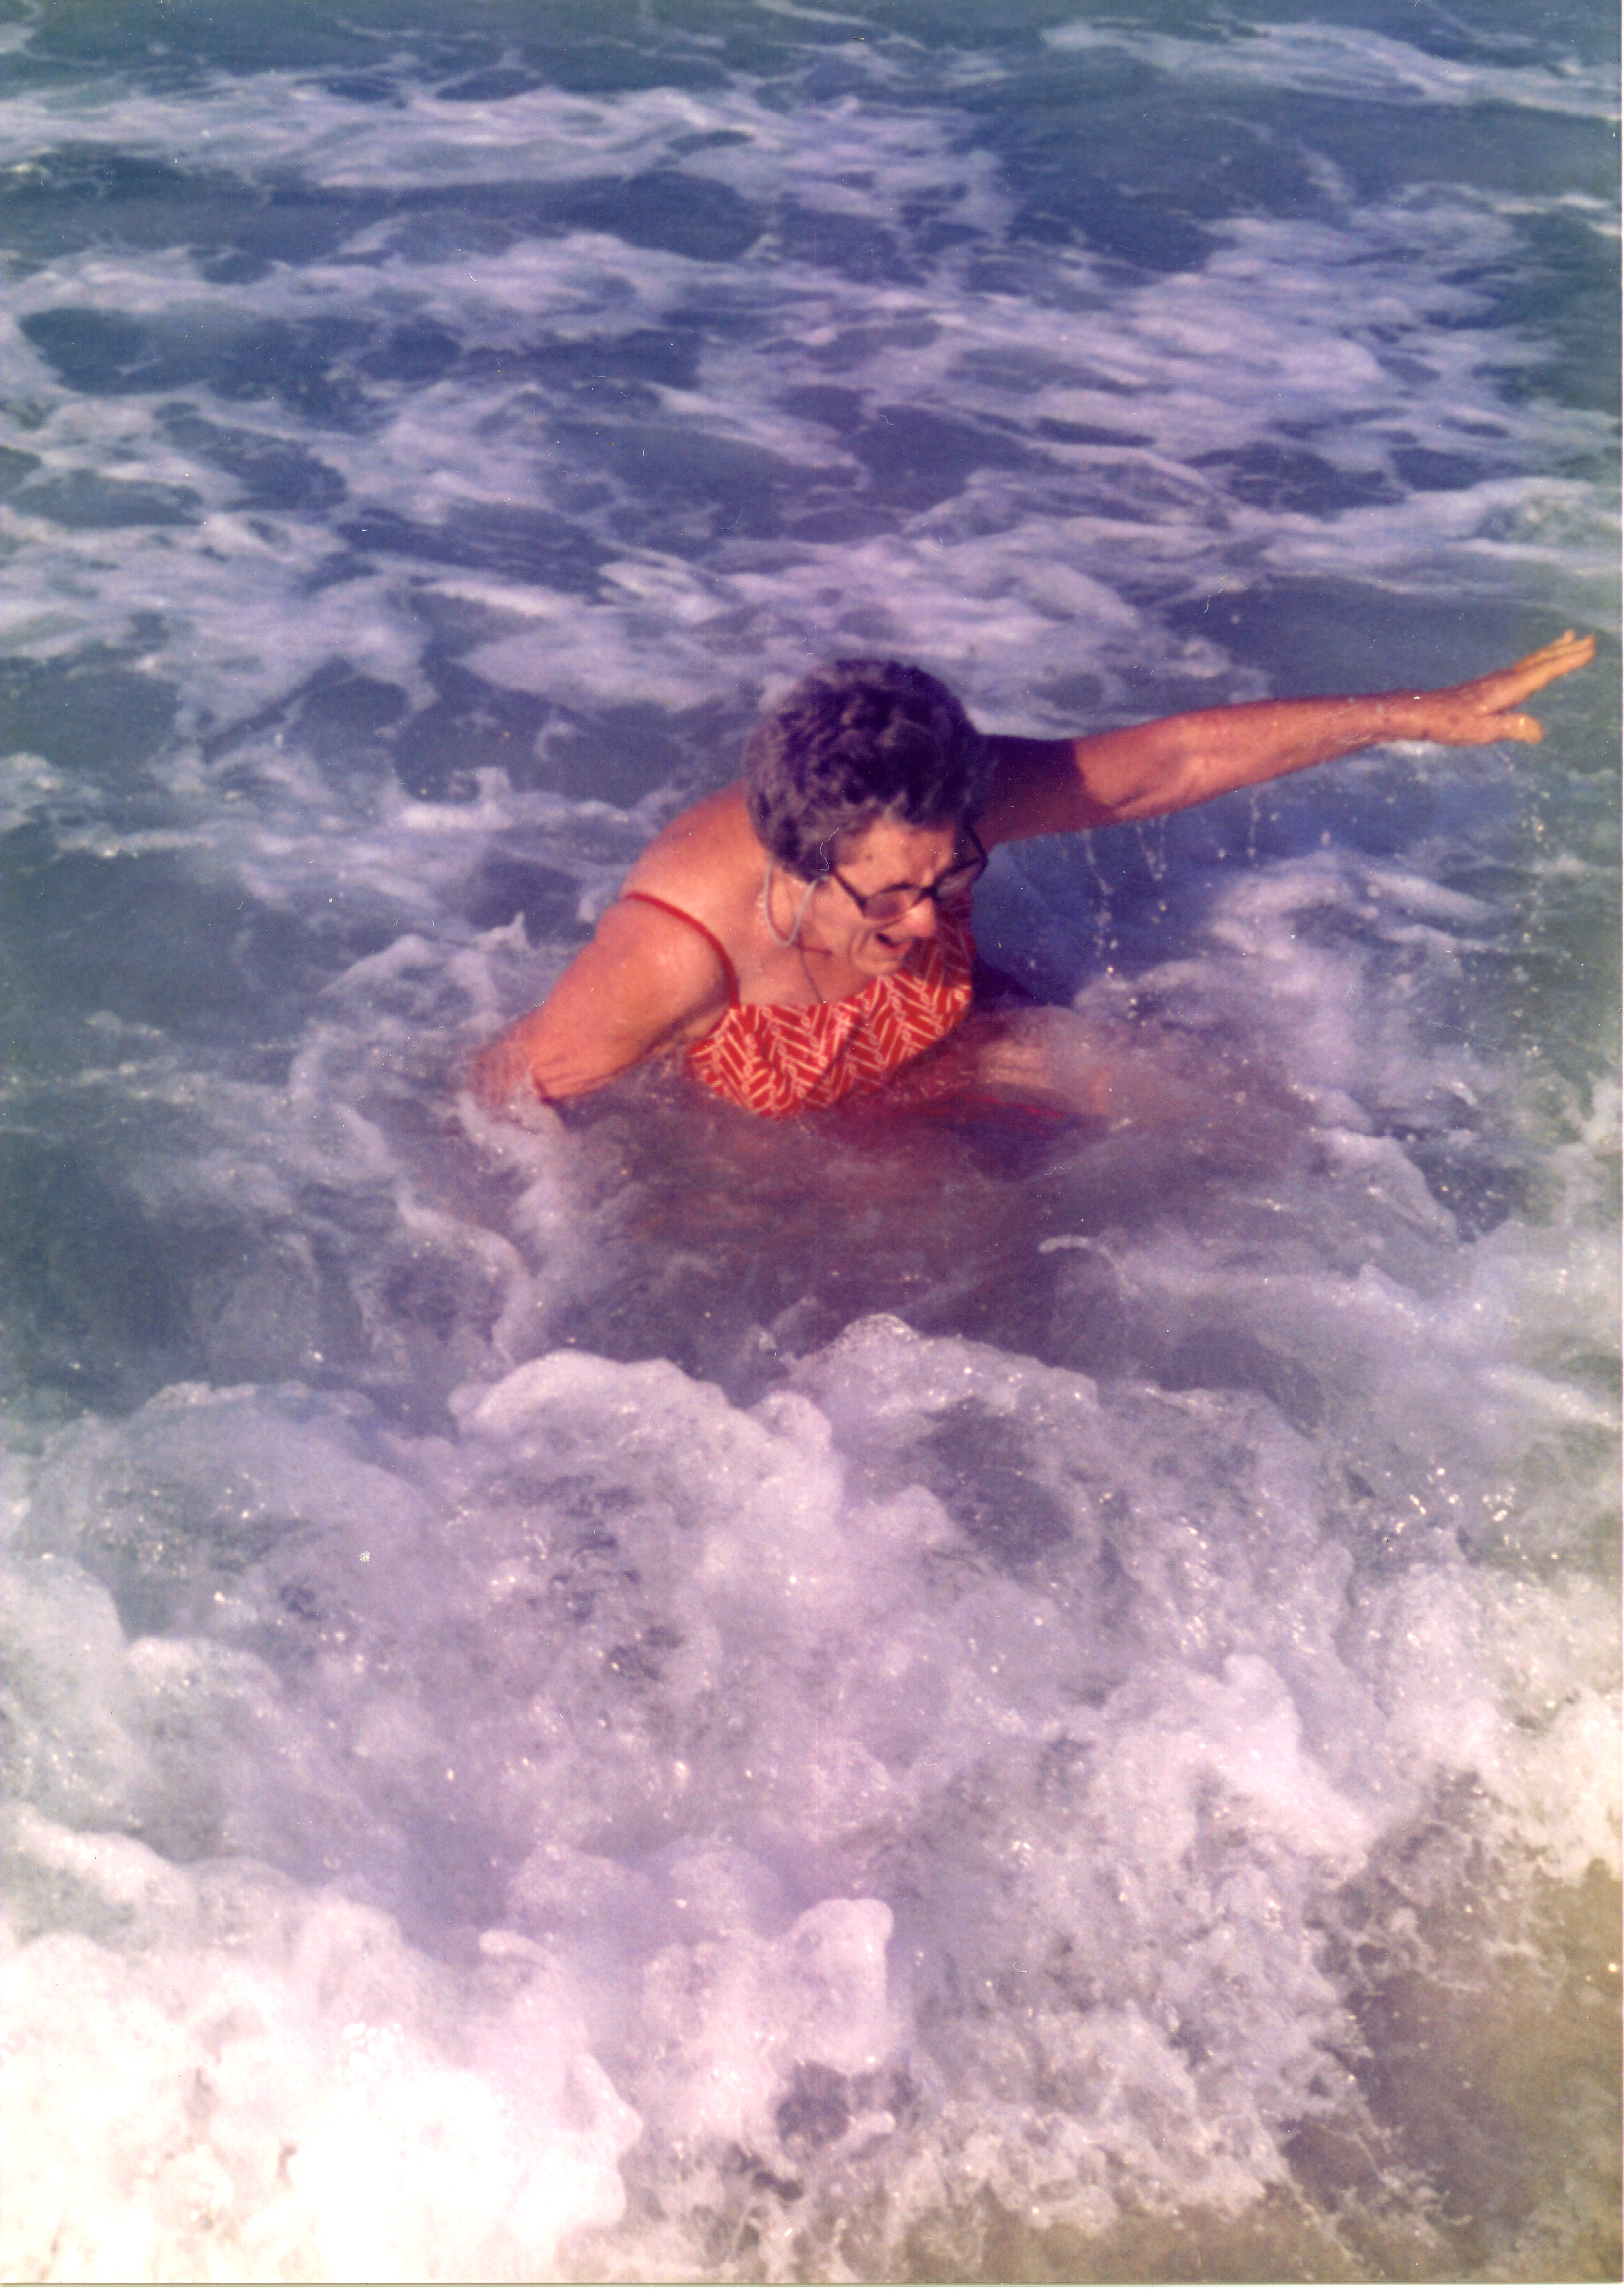 My grandmother's first time in the ocean (in her 70s!)